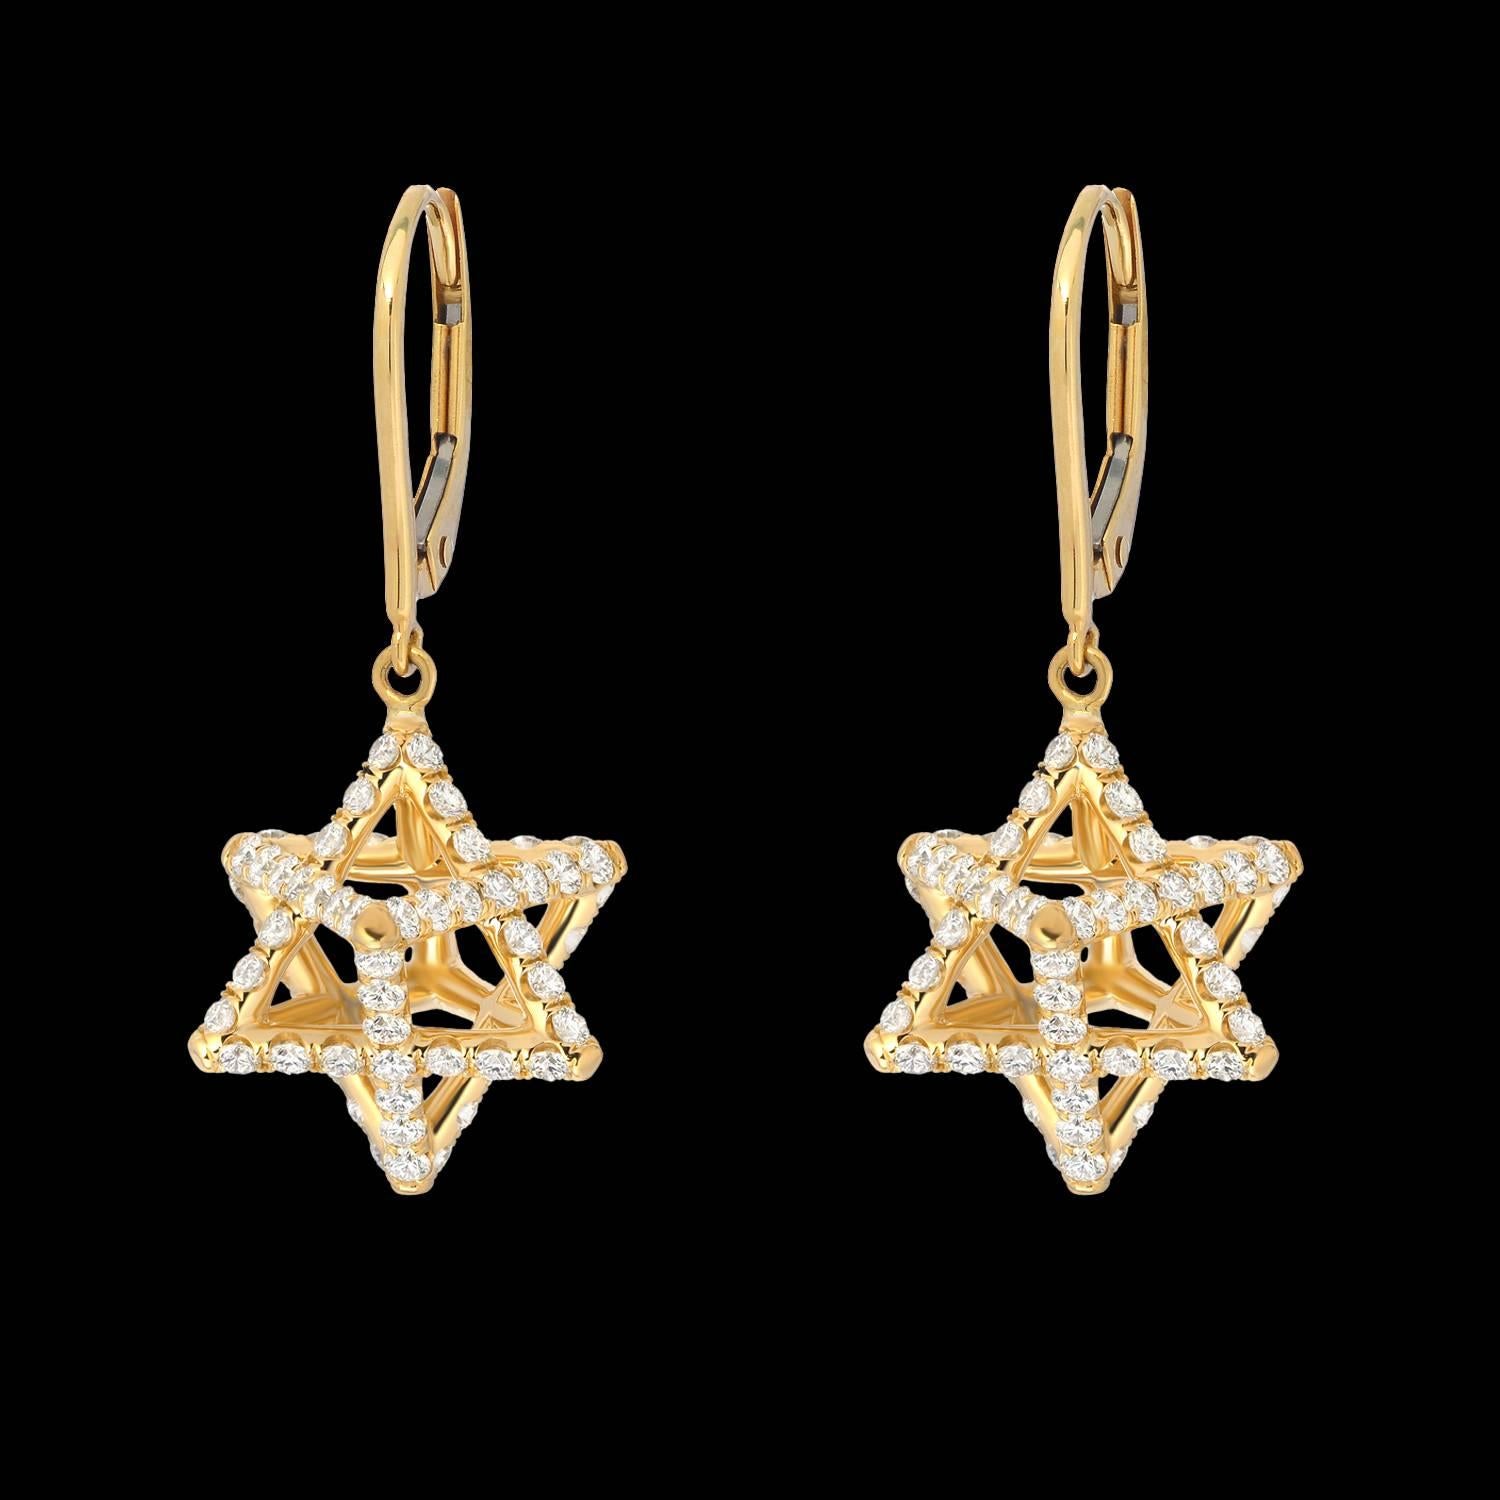 Merkaba 18K yellow gold drop earrings feature a suspended diamond Merkaba star measuring 0.57 inches, set with a total of approximately 2.02 carats of round brilliant diamonds, F-G color and VVS2-VS1 clarity. Heirloom quality earrings, 1.1 inches in